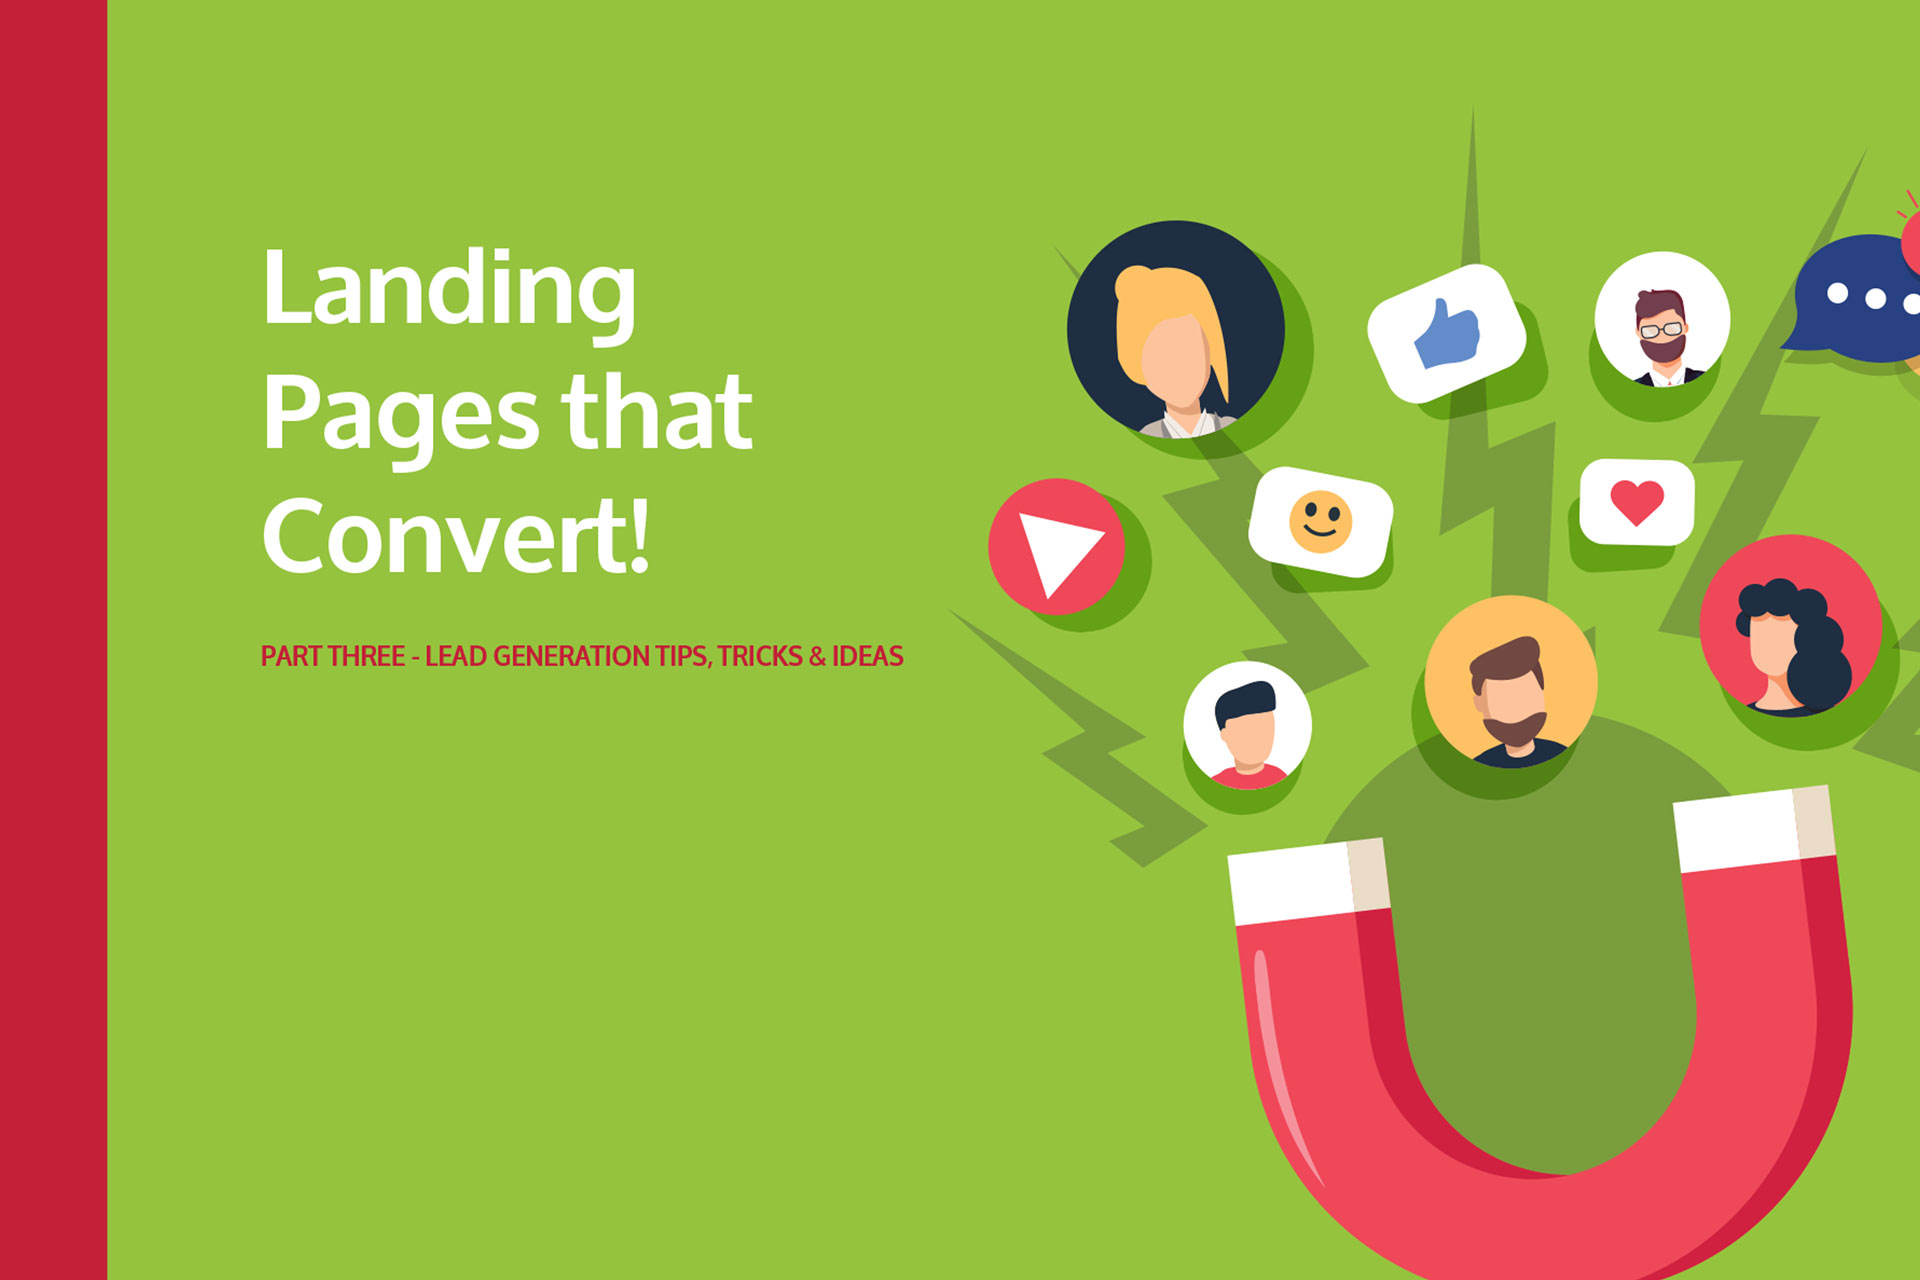 eBook - Landing Pages that Convert - Available to Download